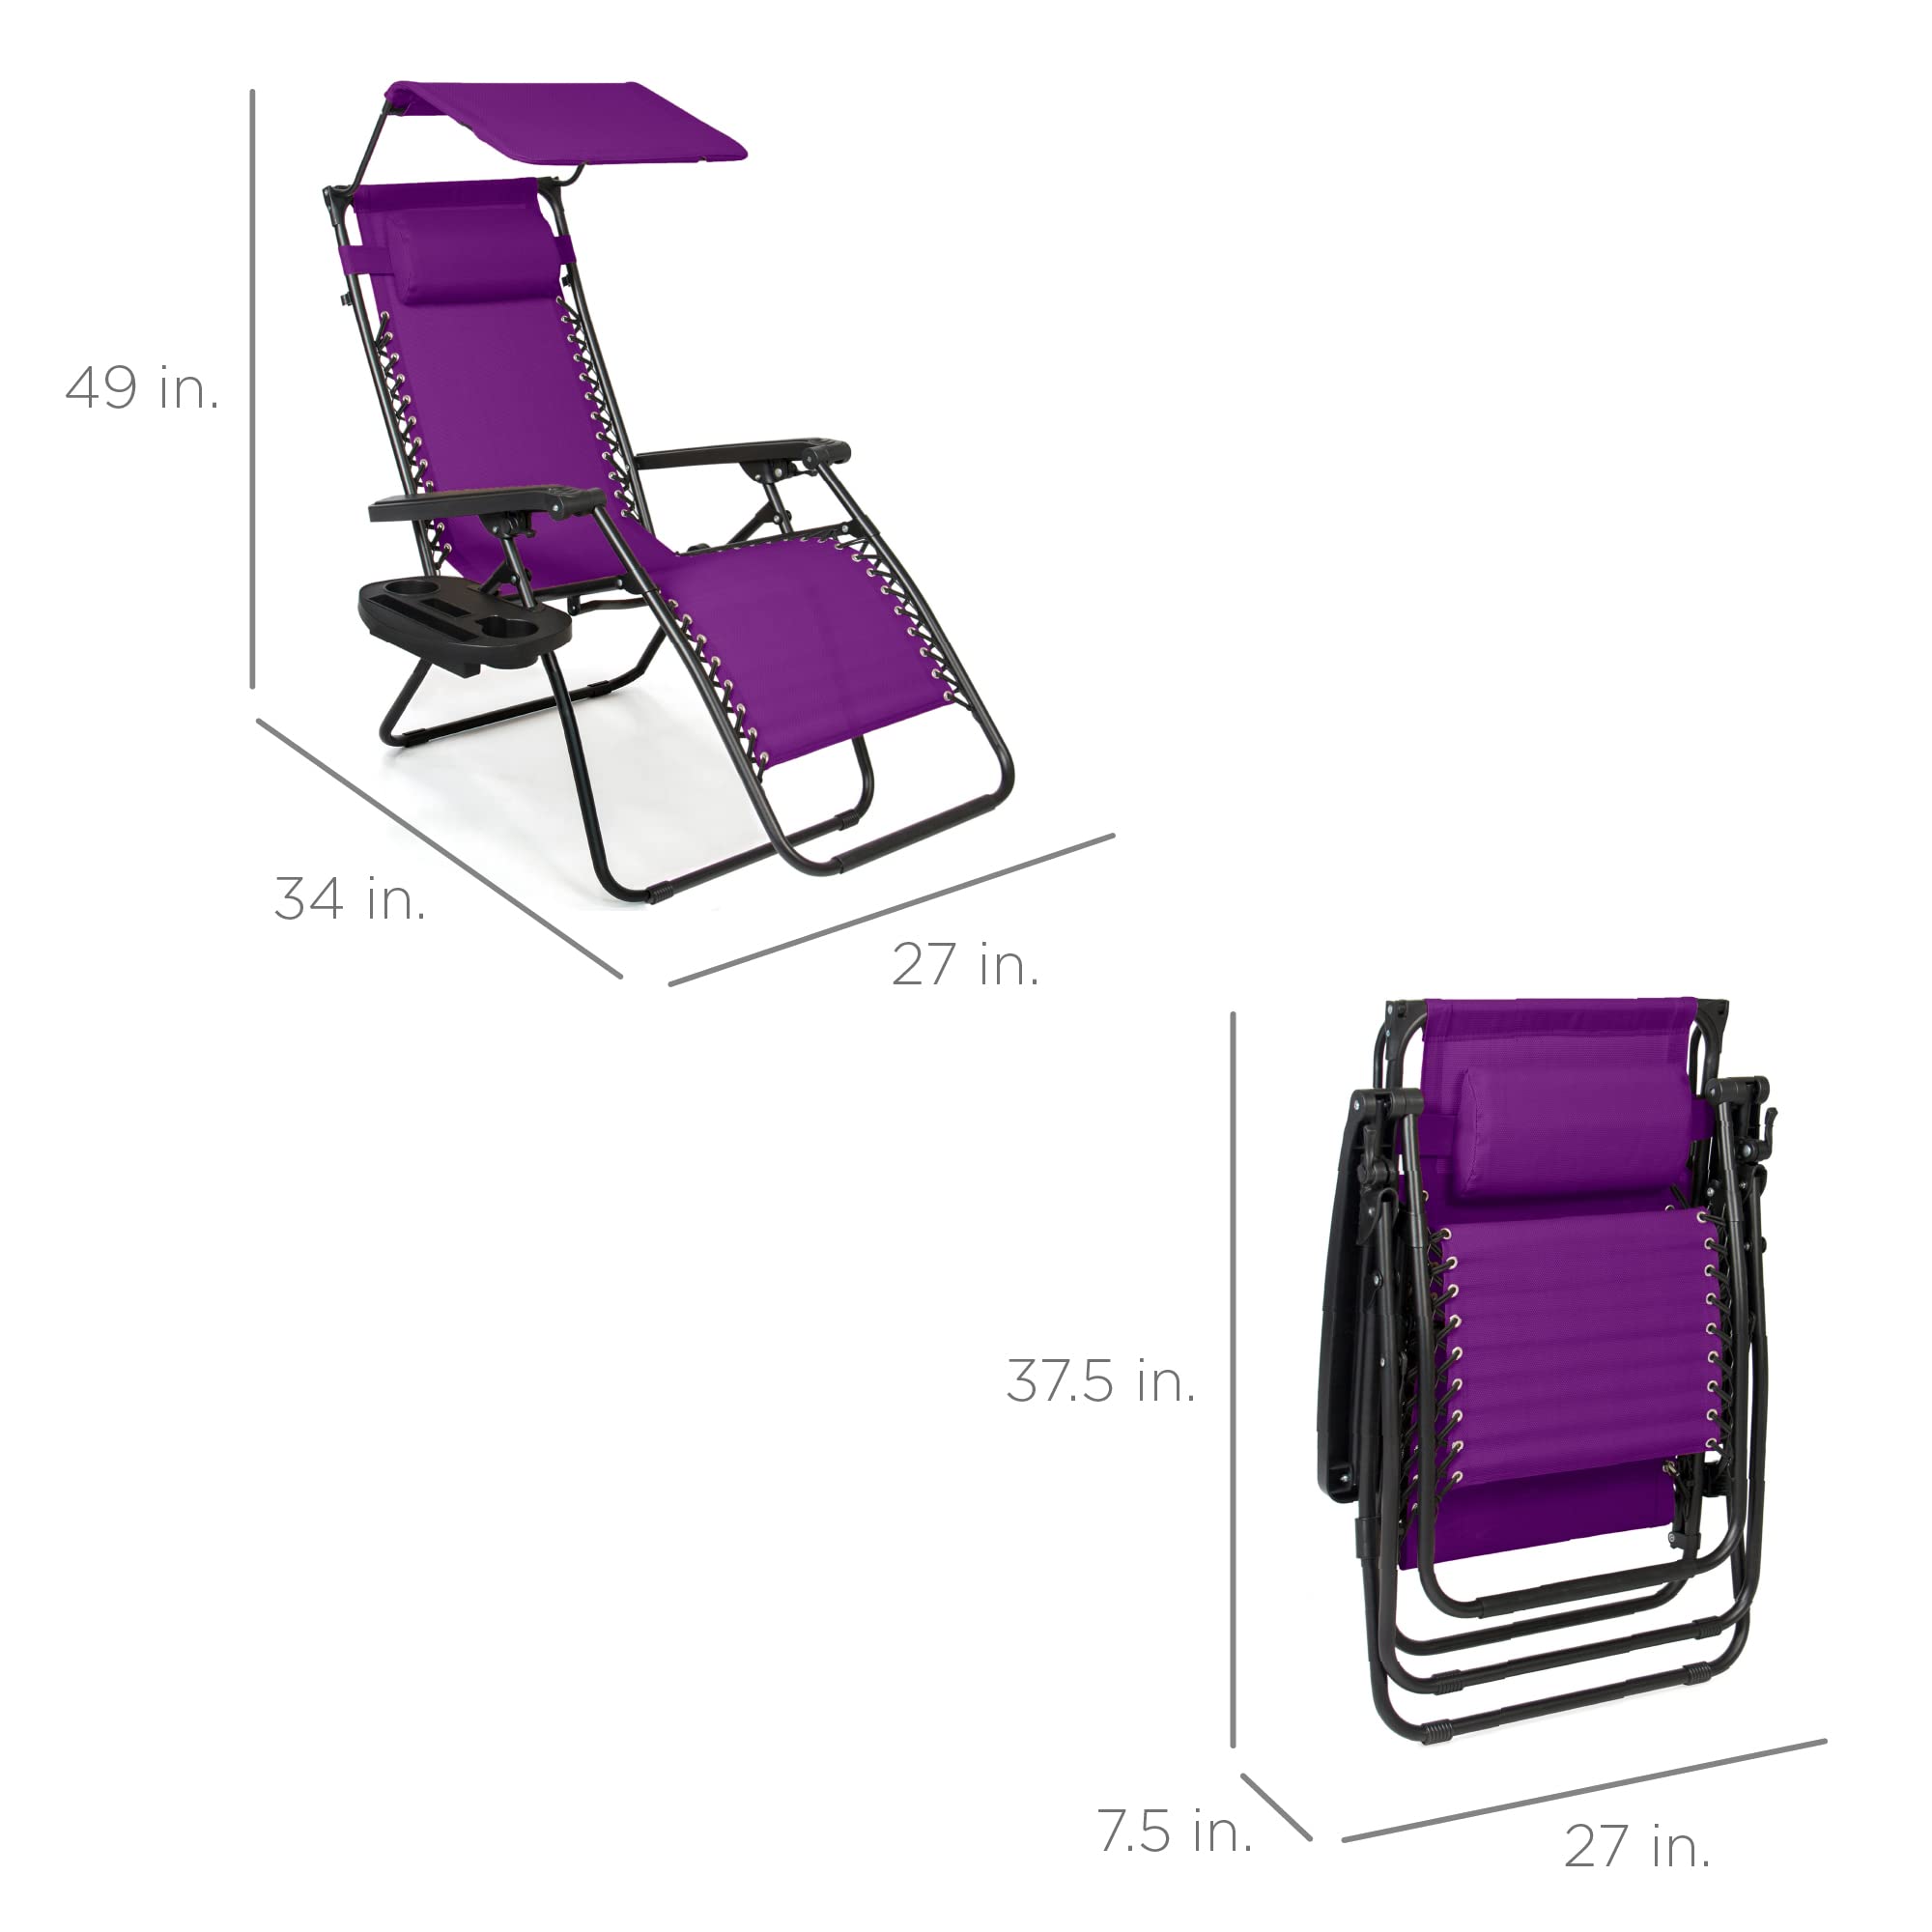 Best Choice Products Folding Zero Gravity Outdoor Recliner Patio Lounge Chair w/Adjustable Canopy Shade, Headrest, Side Accessory Tray, Textilene Mesh - Amethyst Purple